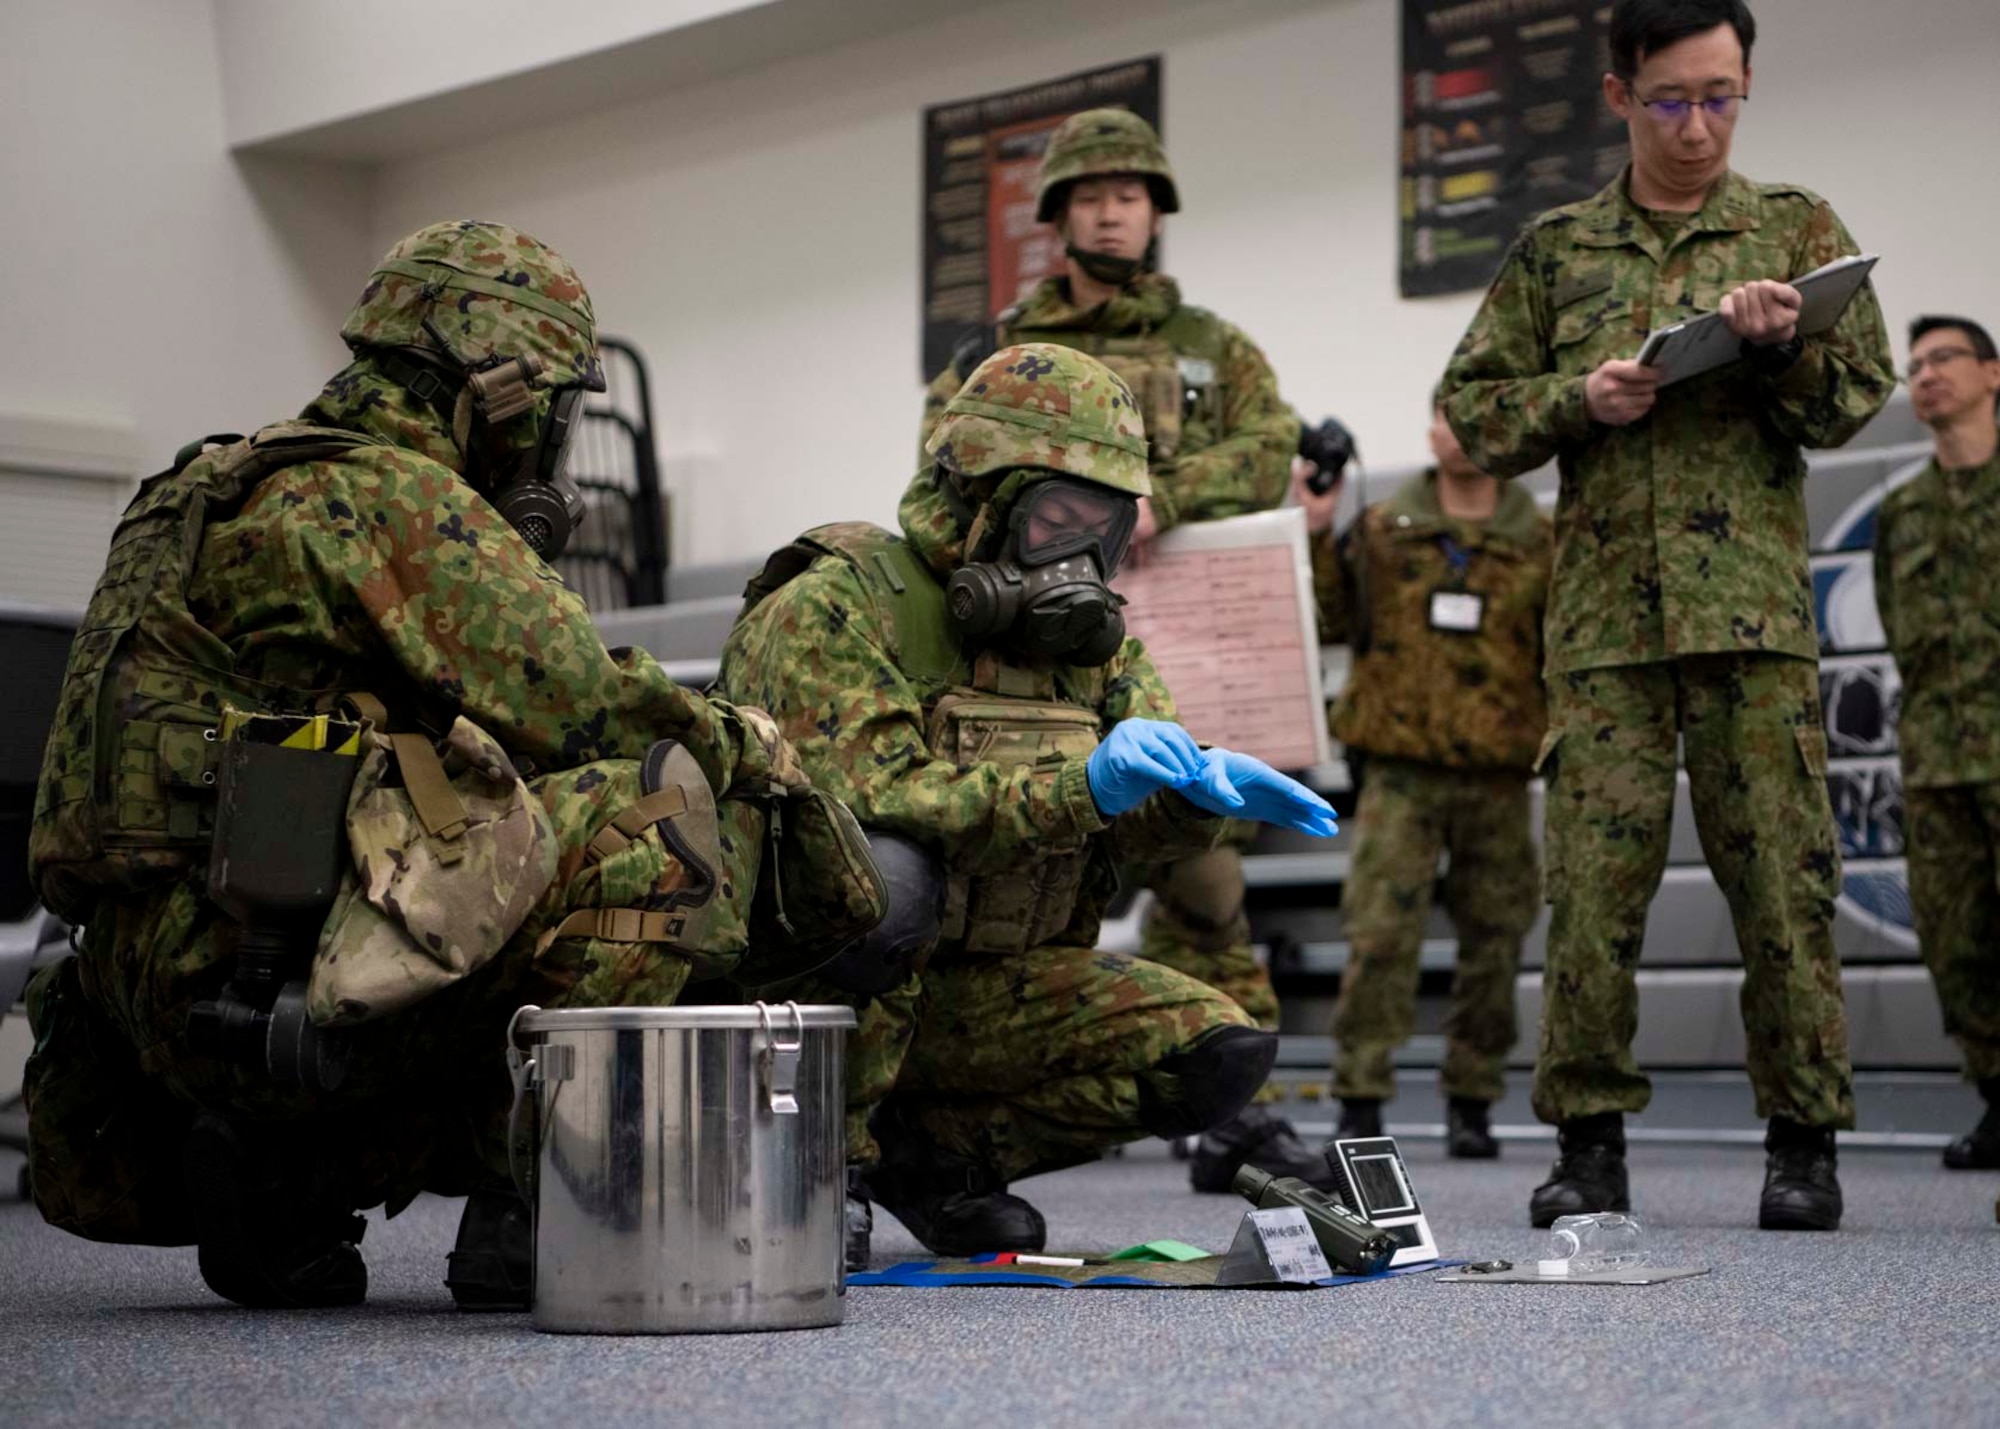 Two Japanese military members crouch down to perform a CBRN demonstration.